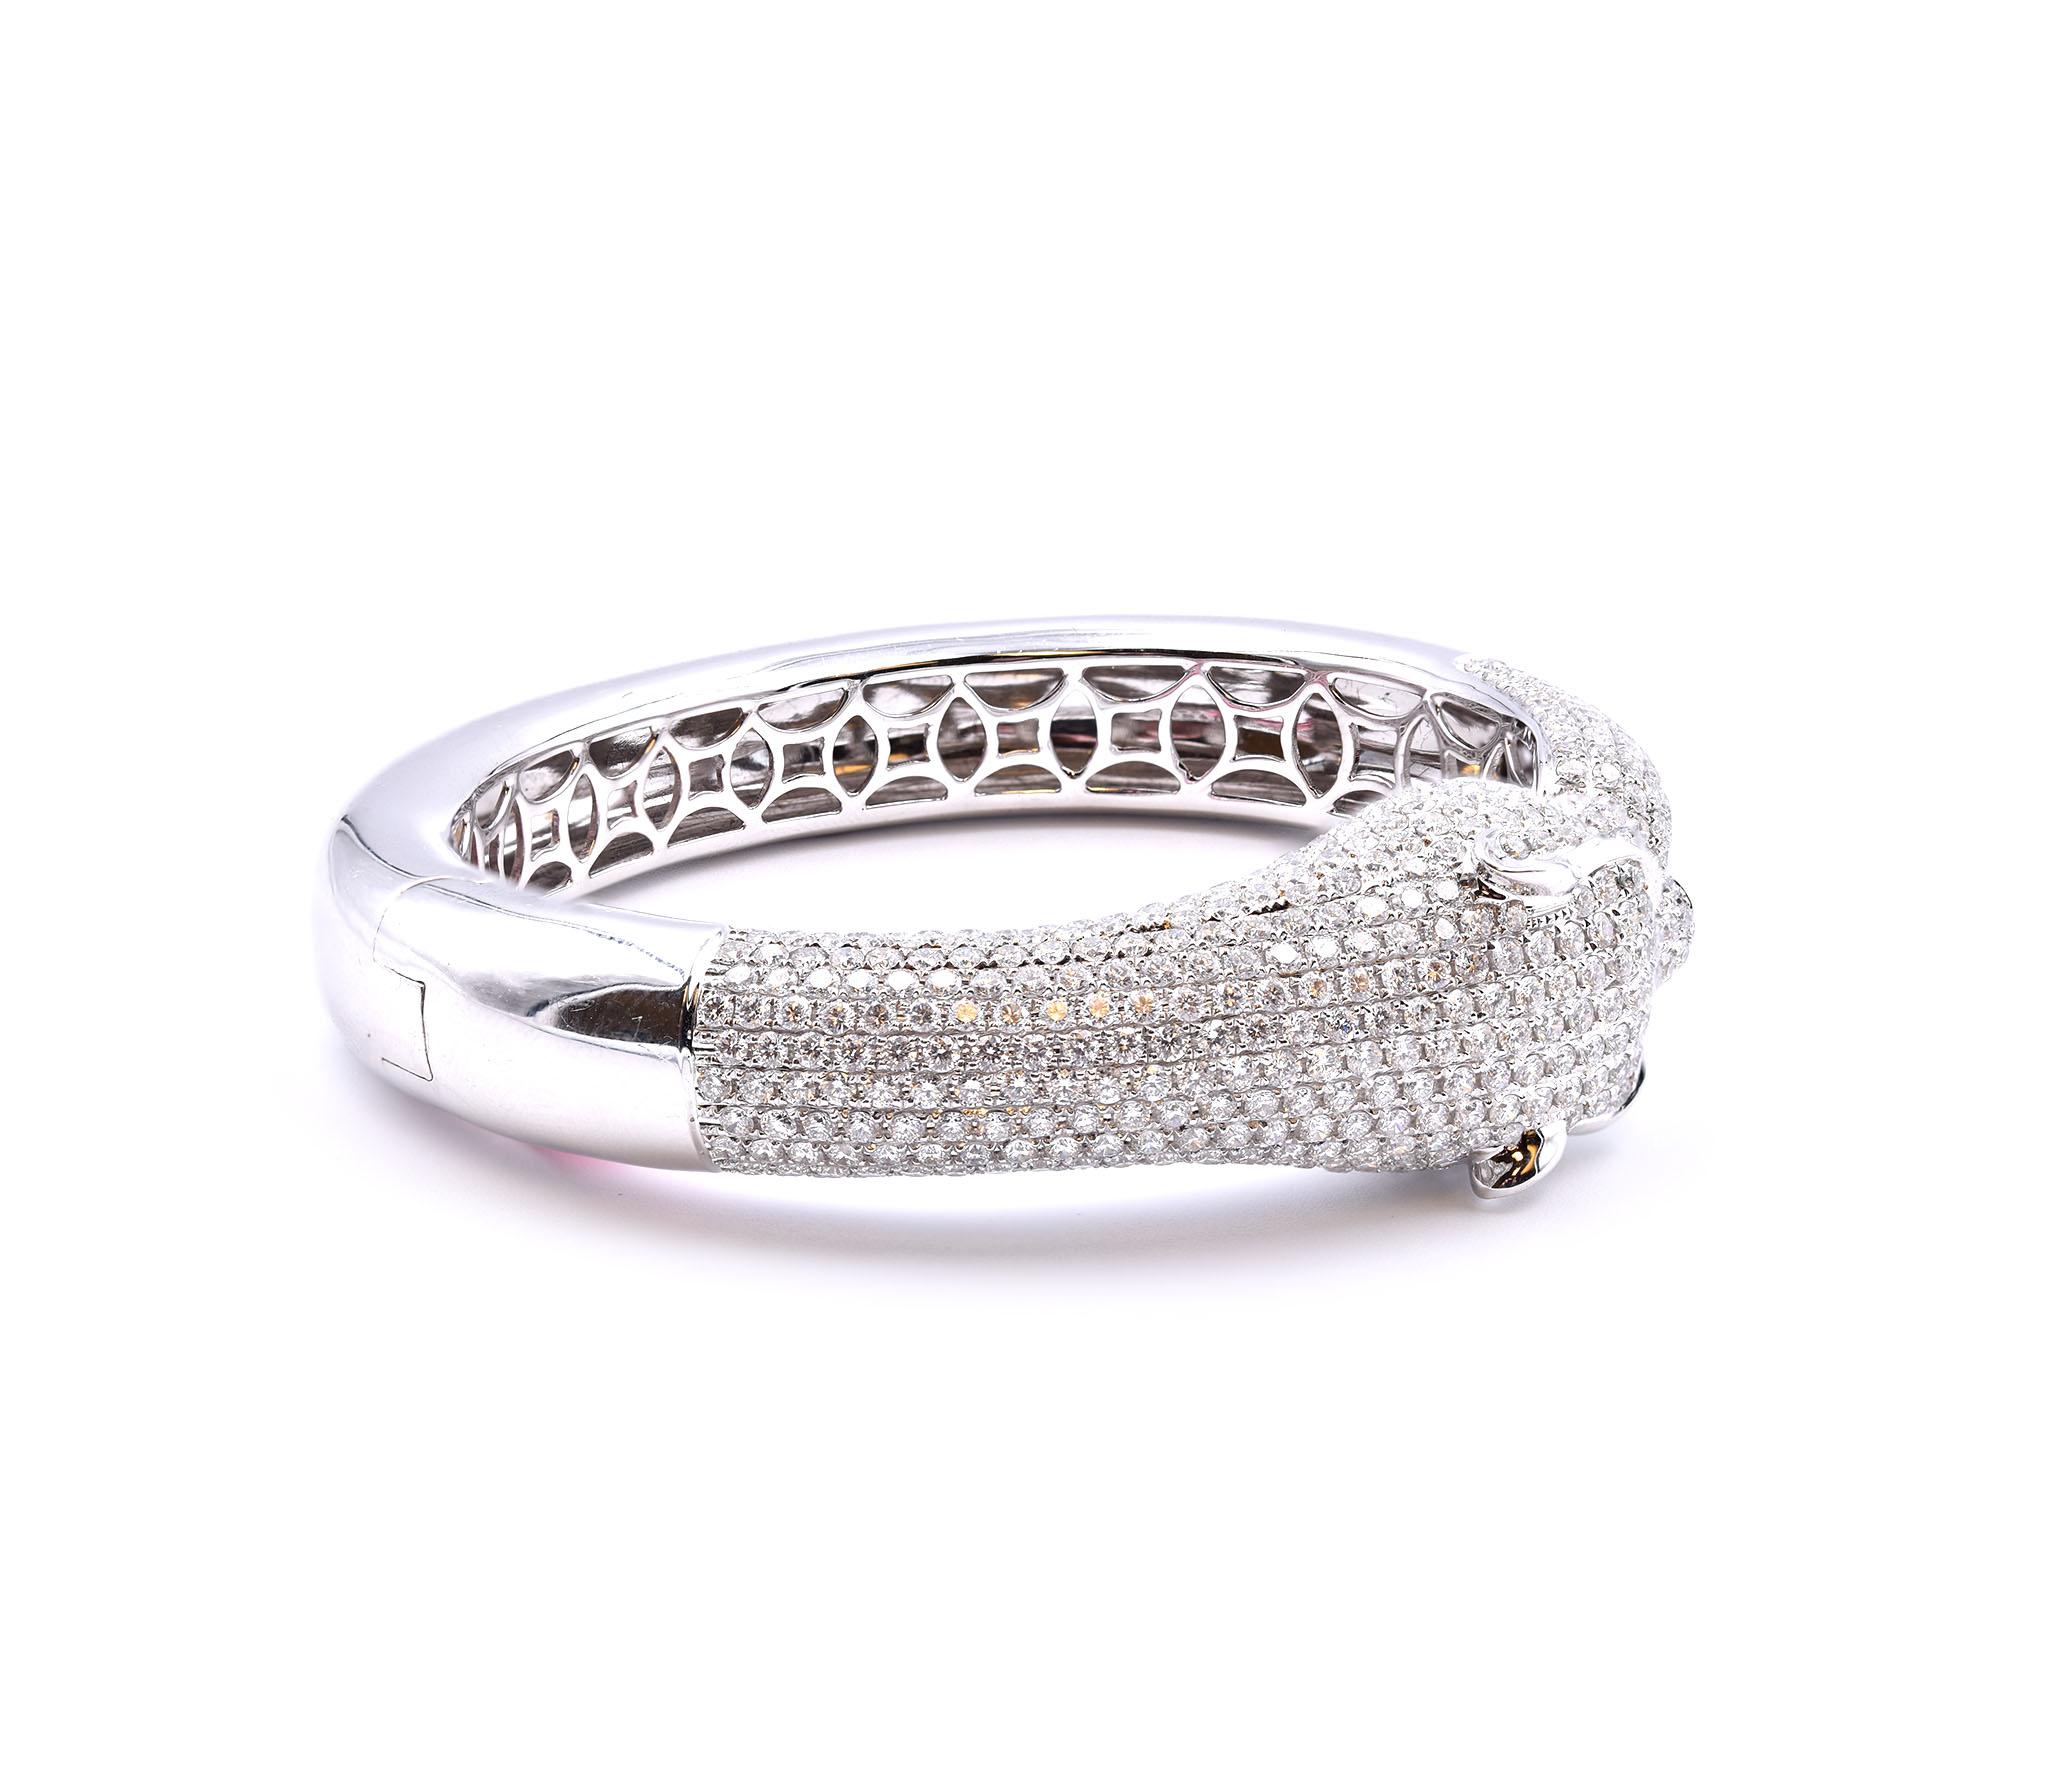 Designer: custom design
Material: 18k white gold
Diamonds: 578 round brilliant cut= 10.40cttw
Color: G
Clarity: VS1
Dimensions: bangle will fit a size 6 ½-inch wrist,  bangle is 11.78mm-18.31mm wide
Weight: 56.42 grams	
